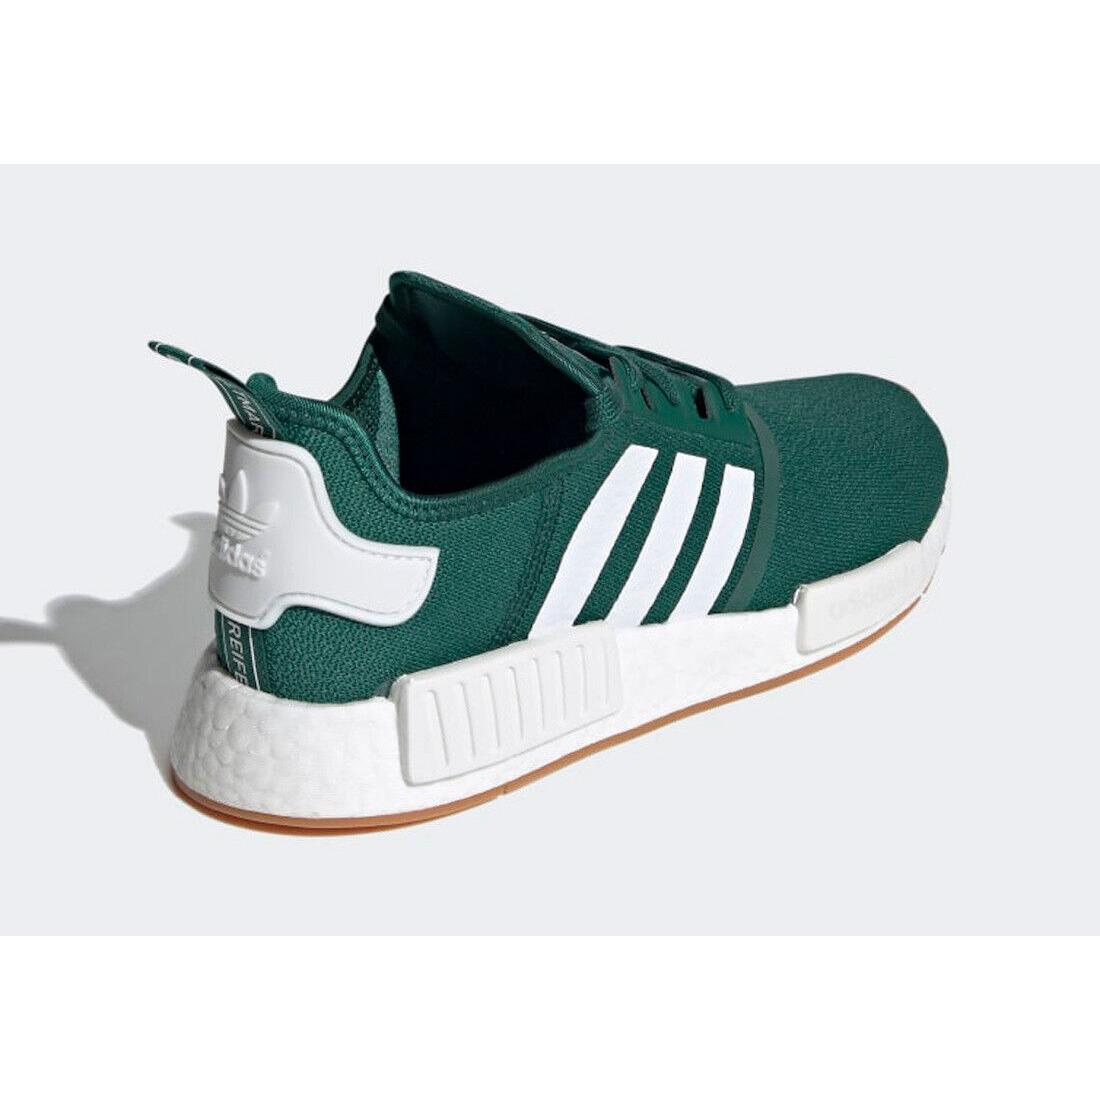 Adidas shoes NMD - Green 1